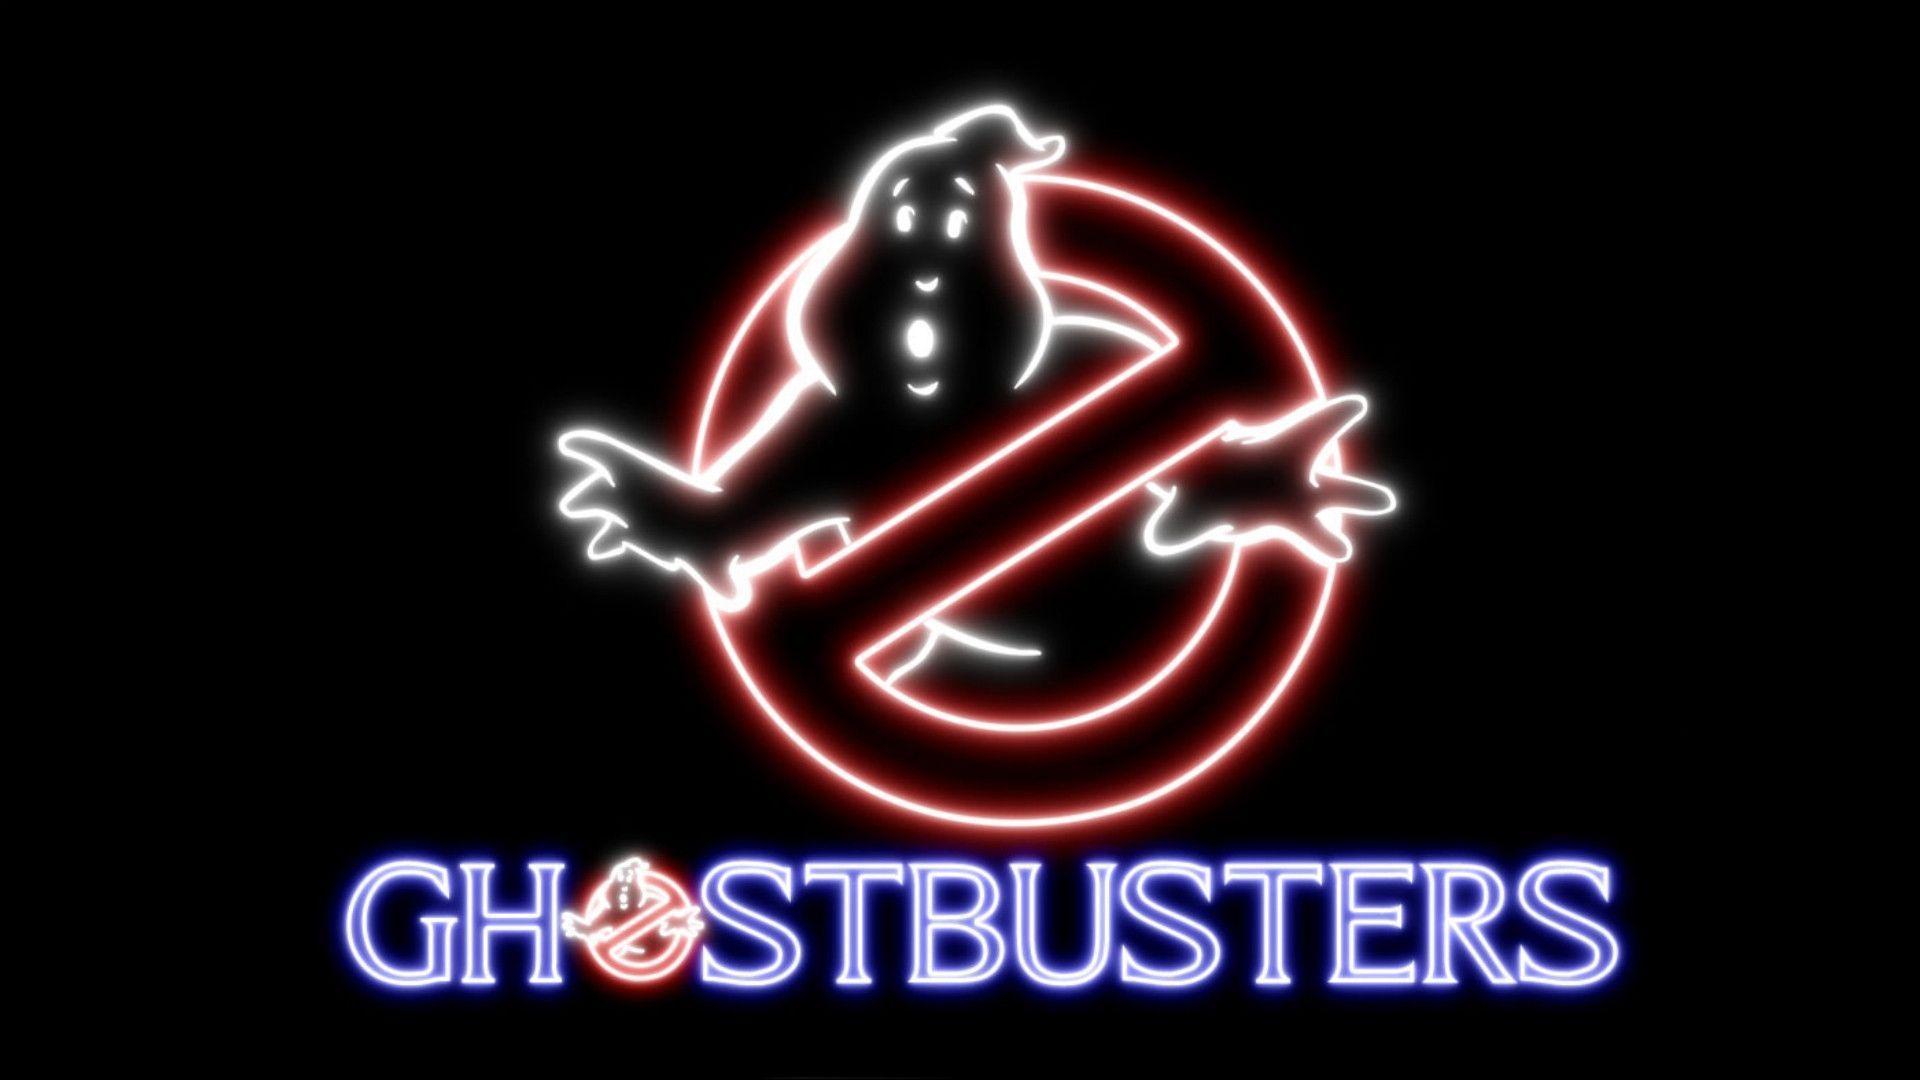 Ghostbusters Wallpaper For iPhone 4 Picture